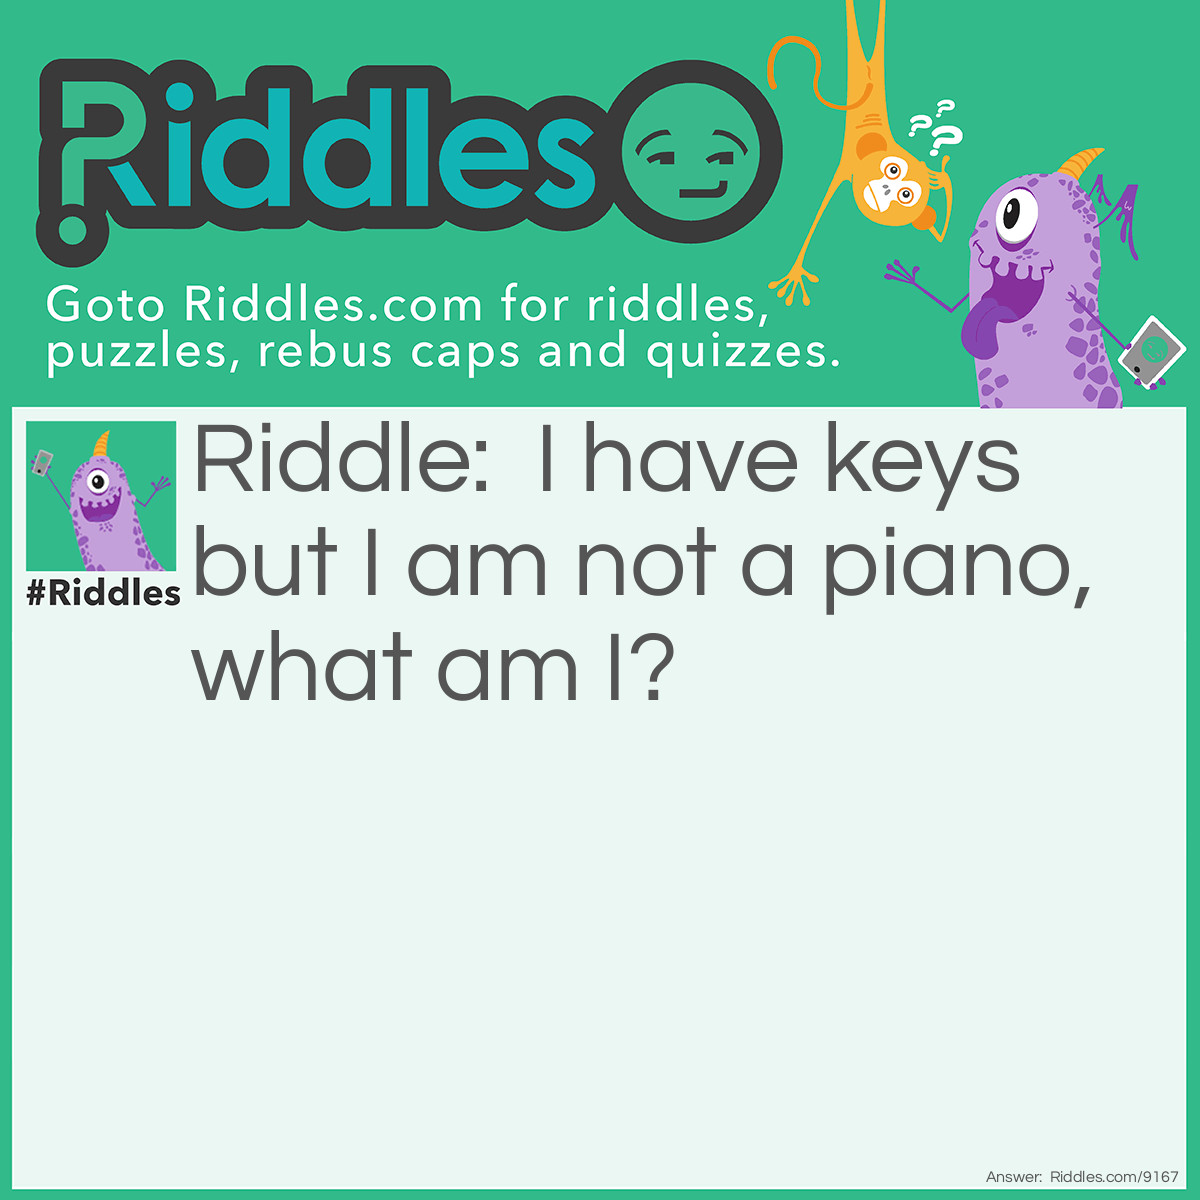 Riddle: I have keys but I am not a piano, what am I? Answer: A Key Maker.